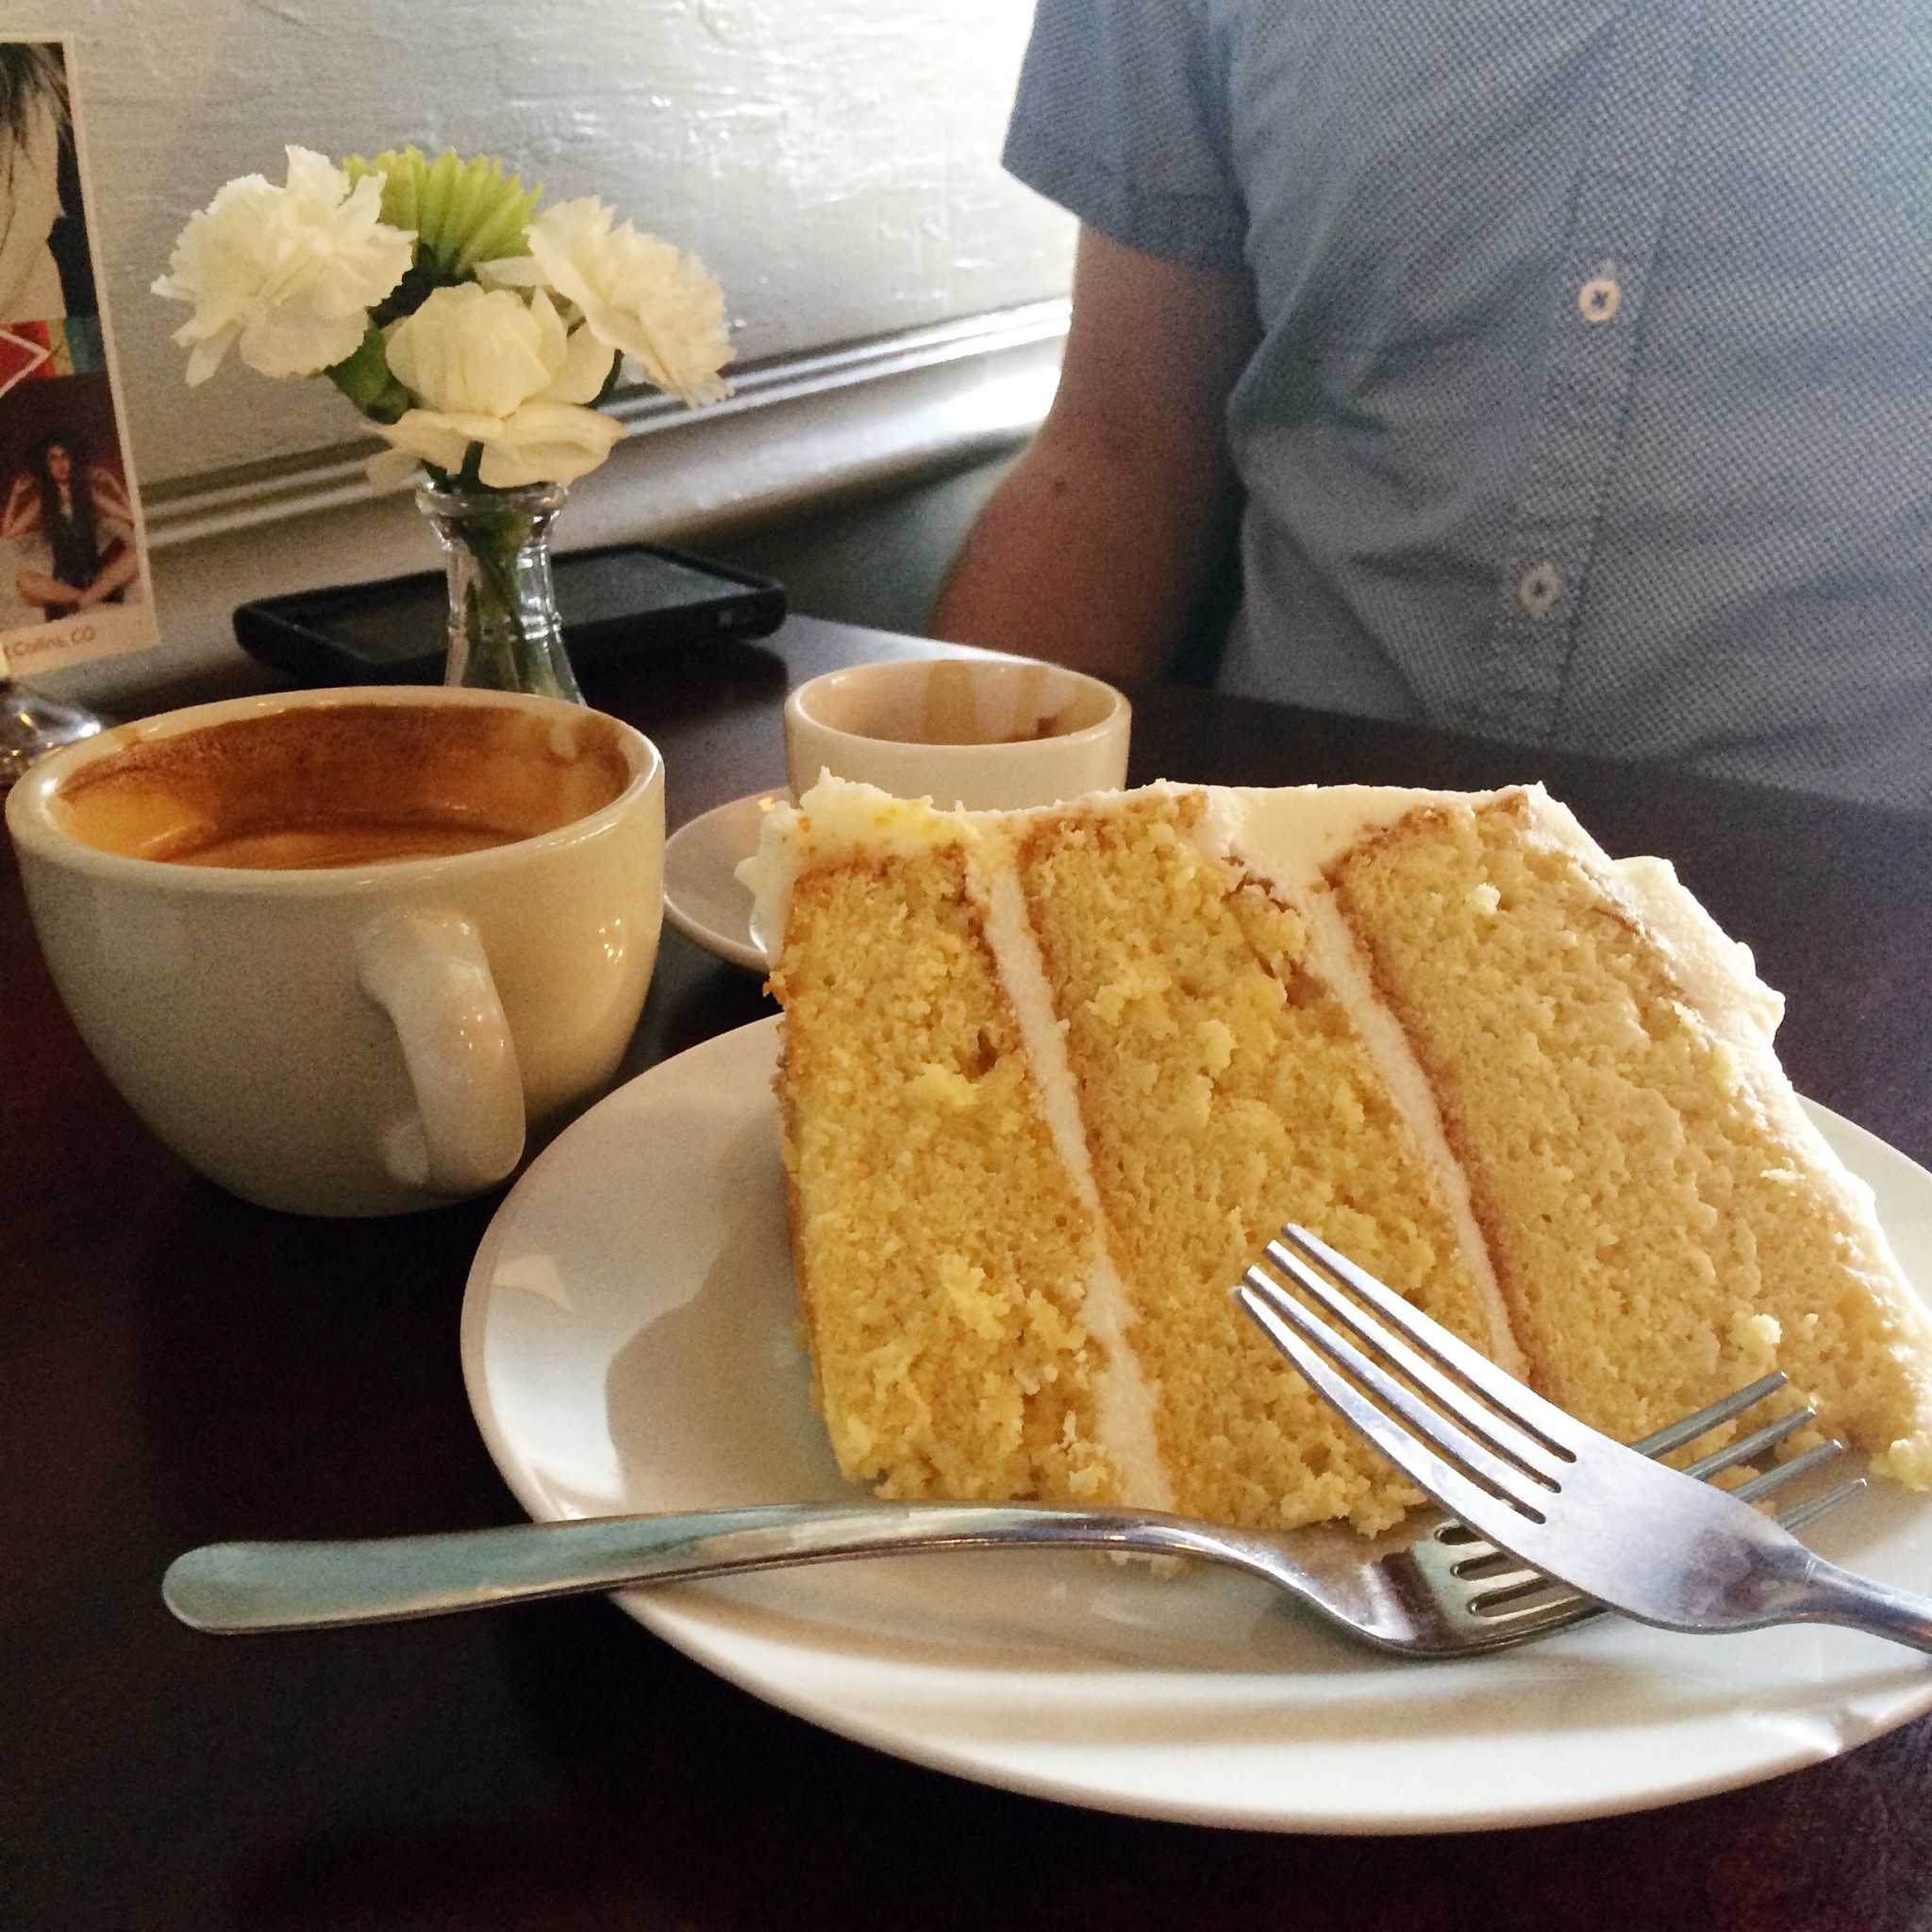 A slice of lemon cake along with a latte and an espresso. Photo by Rachael Worthington.